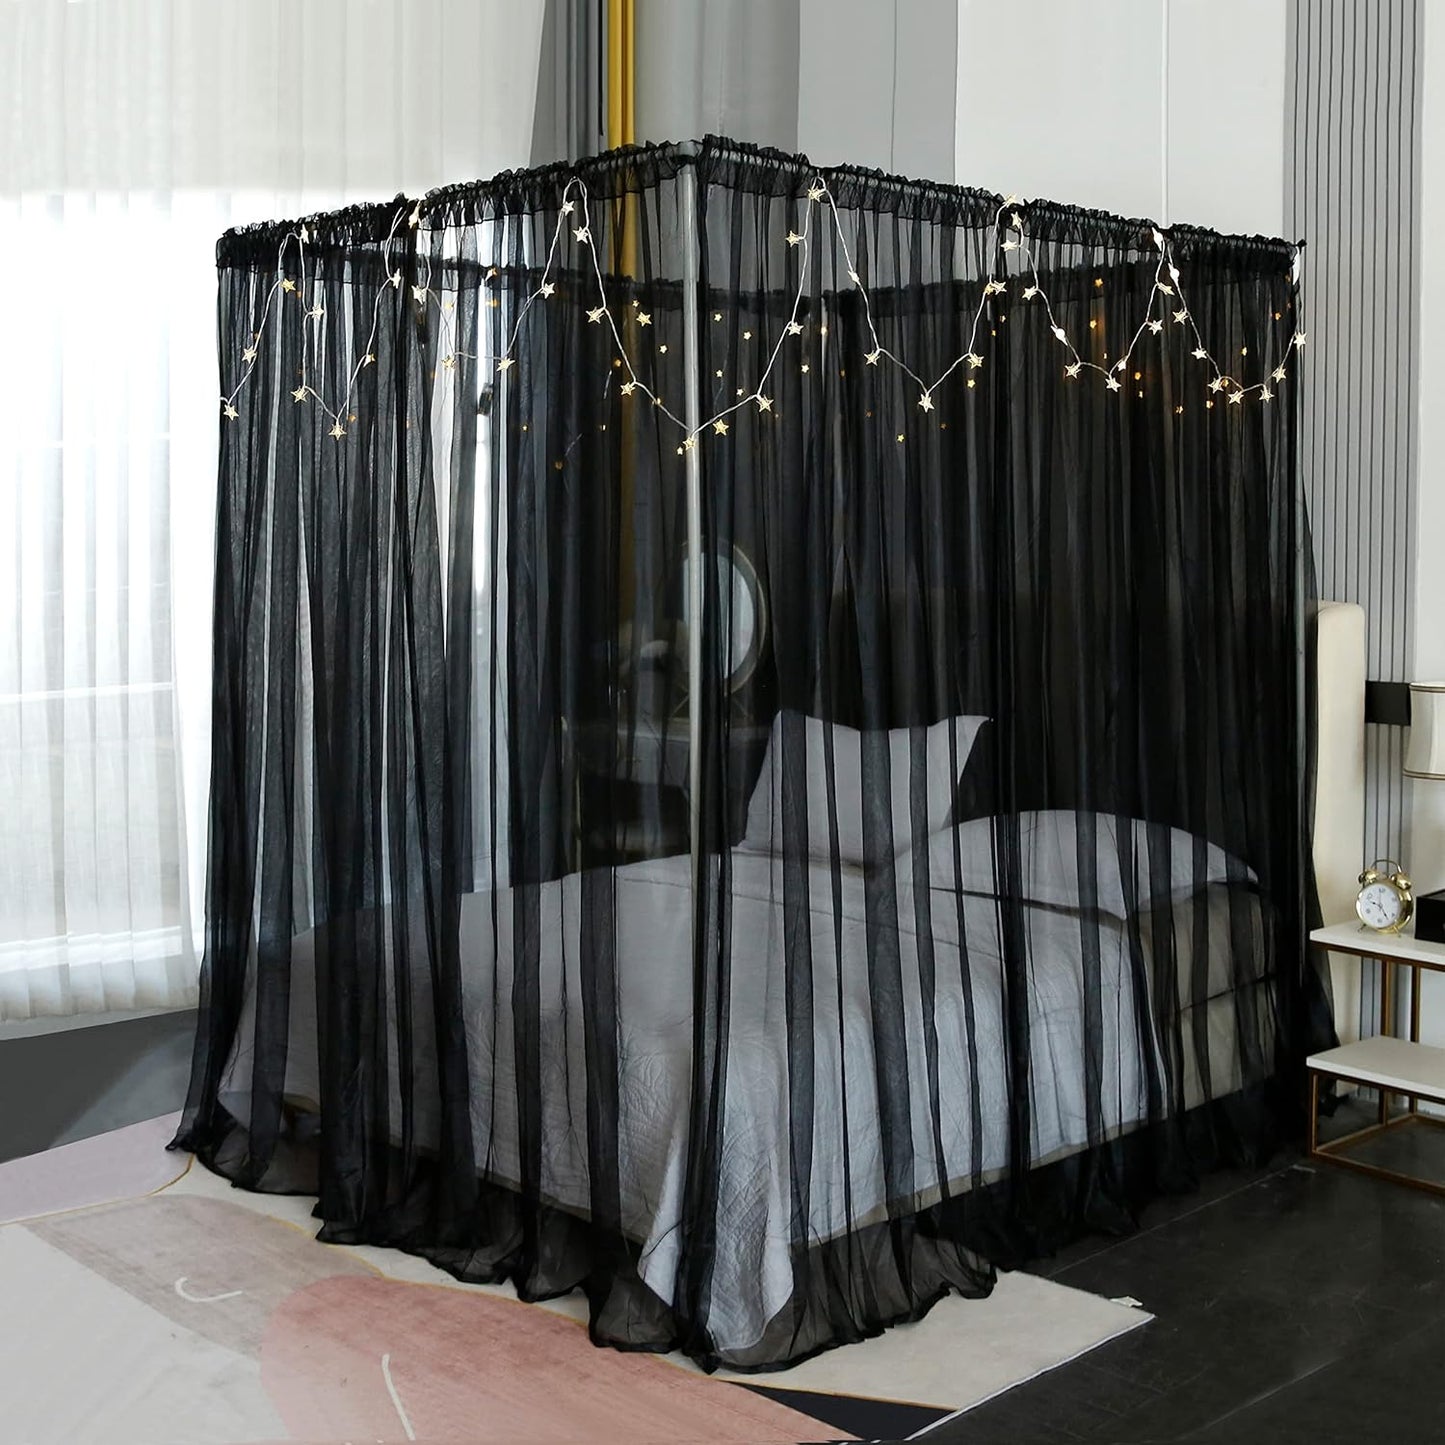 Akiky Princess Canopy Bed Curtains Bed Canopy Curtains with Lights for Queen Size Bed Drapes,8 Panels Canopies with 2 Lights,Room Décor (Full/Queen, White)  Akiky Black King 